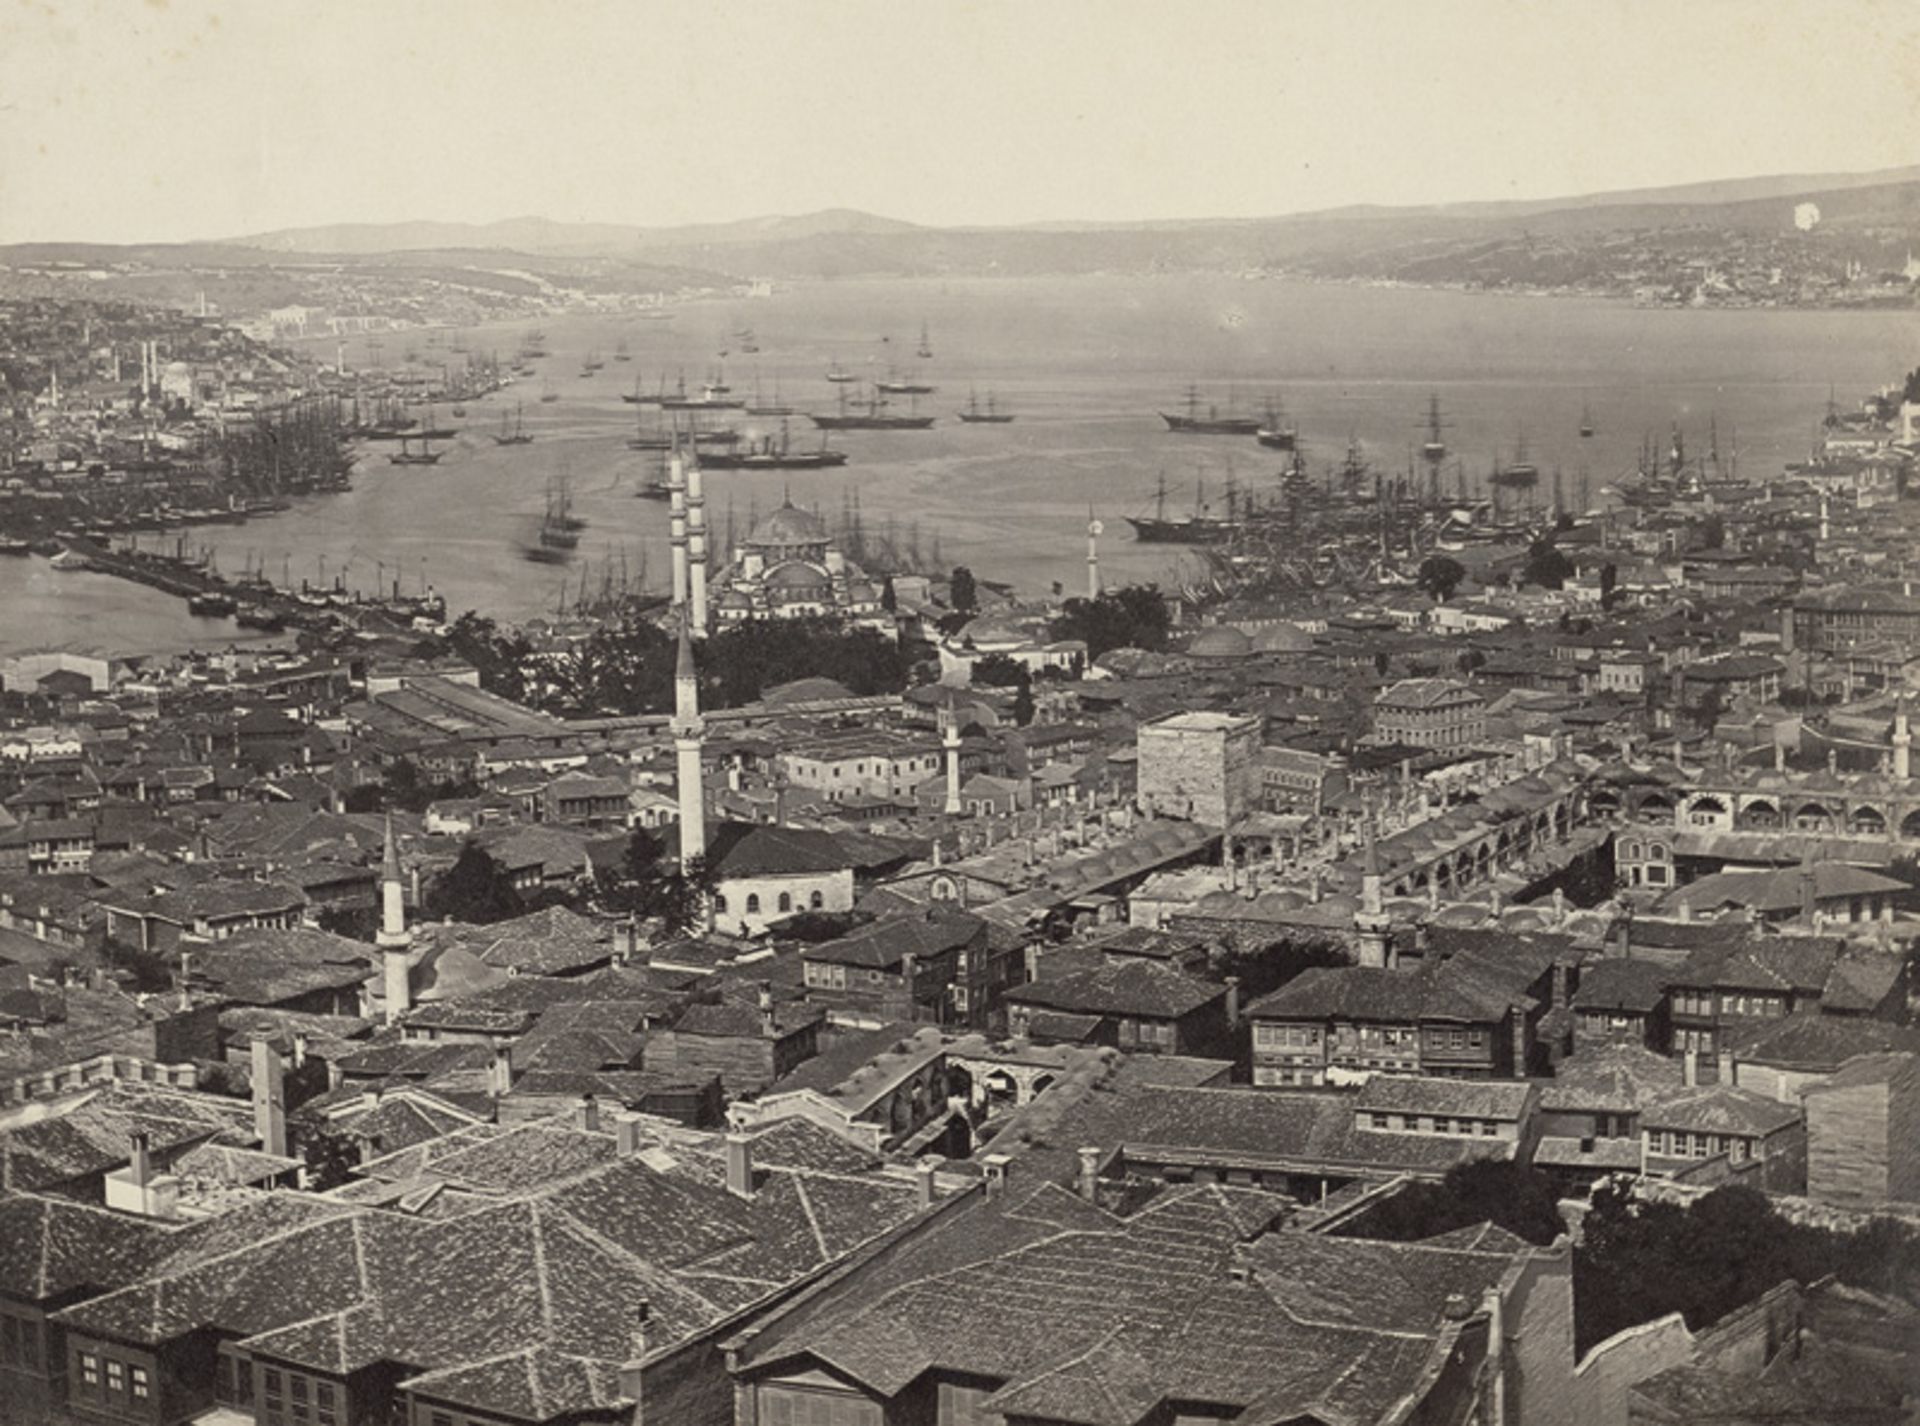 Robertson, James and Felice Beato: Panorama of Constantinople - Image 4 of 6